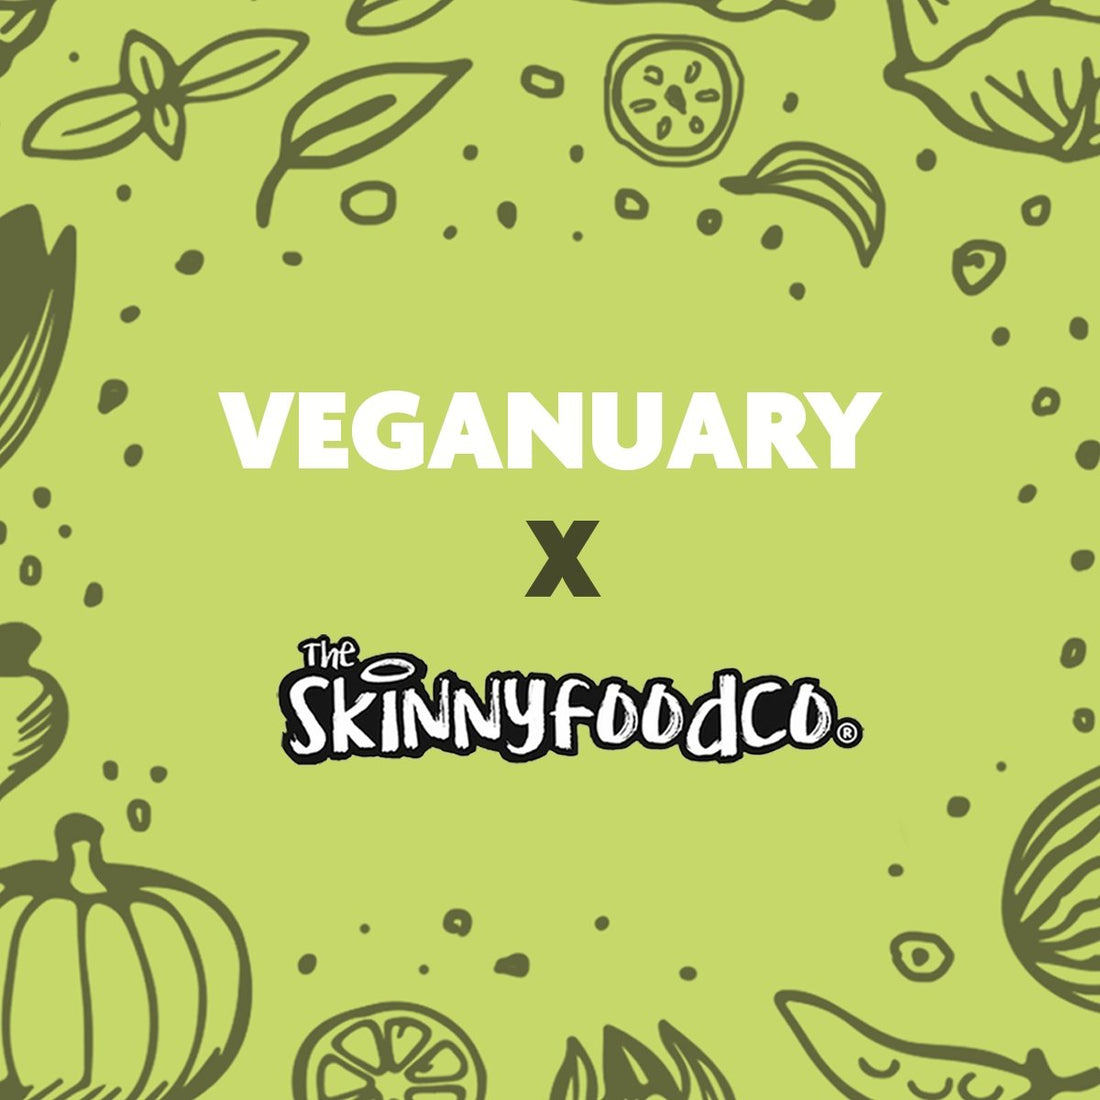 What I Eat In A Day: Veganuary With Flo - theskinnyfoodco